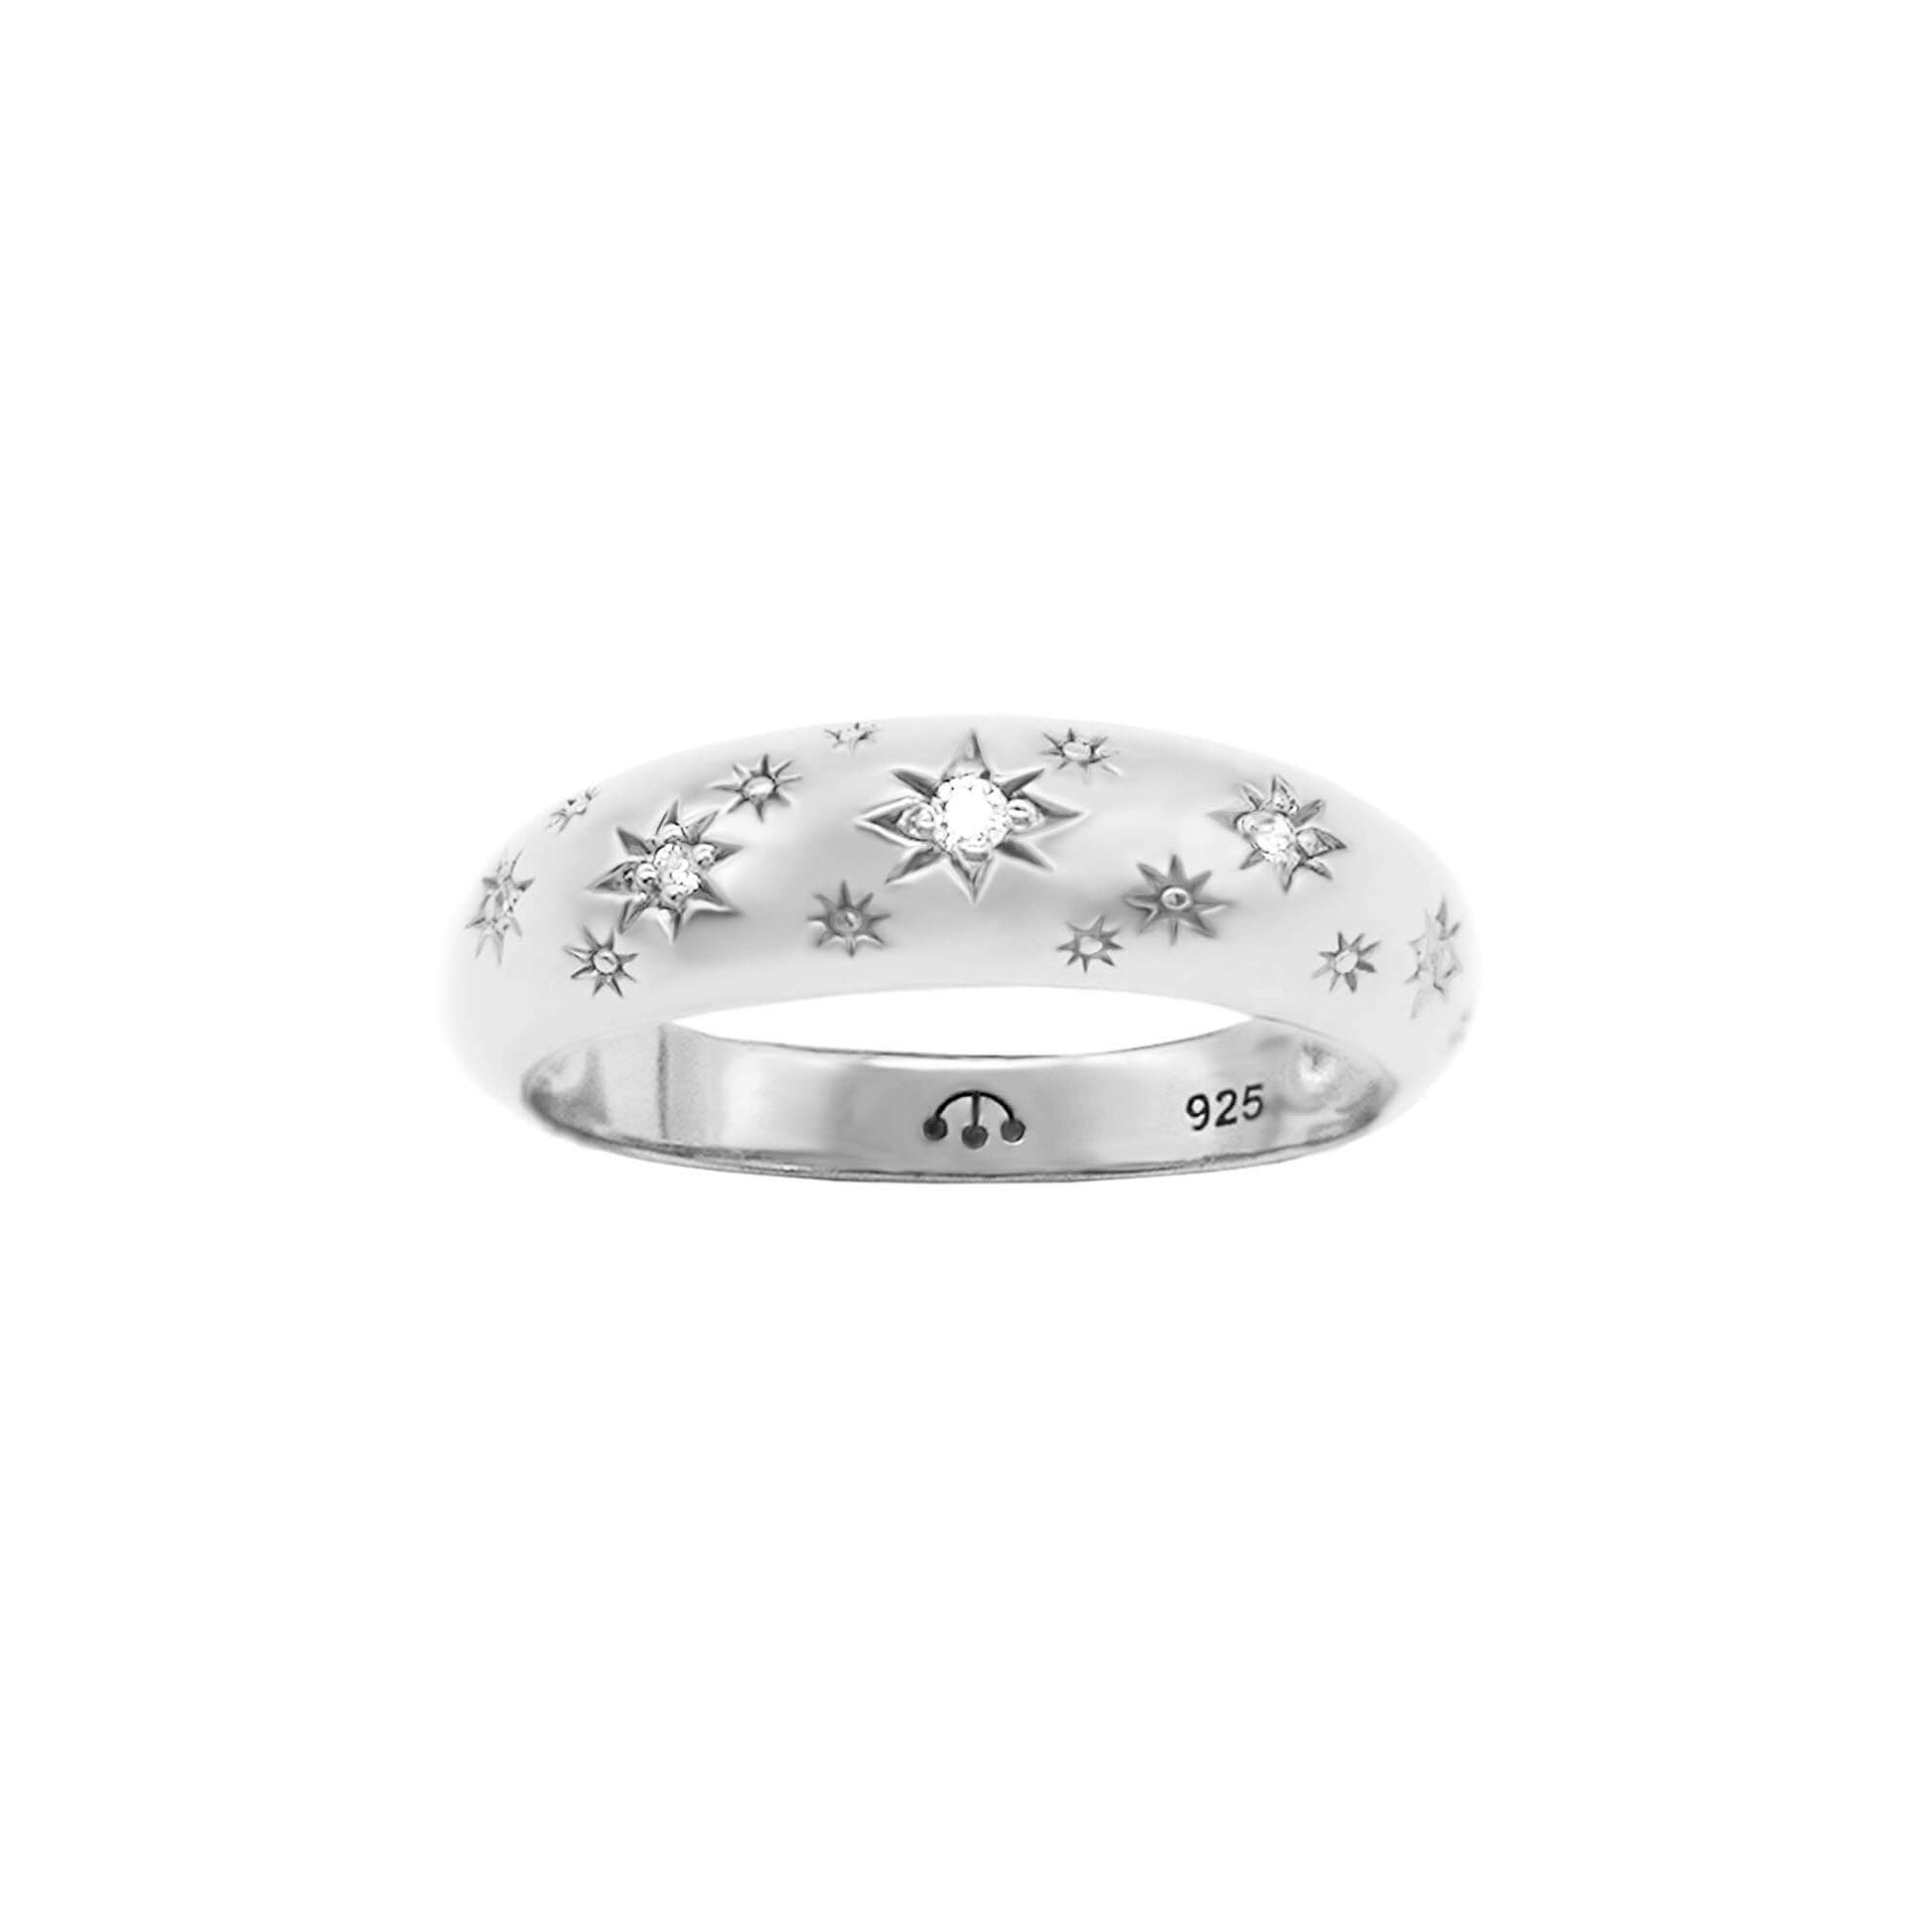 Silver domed band ring with clear CZ stones set in starburst setting- with pawnshop 3 ball logo & sterling silver 925 mark on inner band.